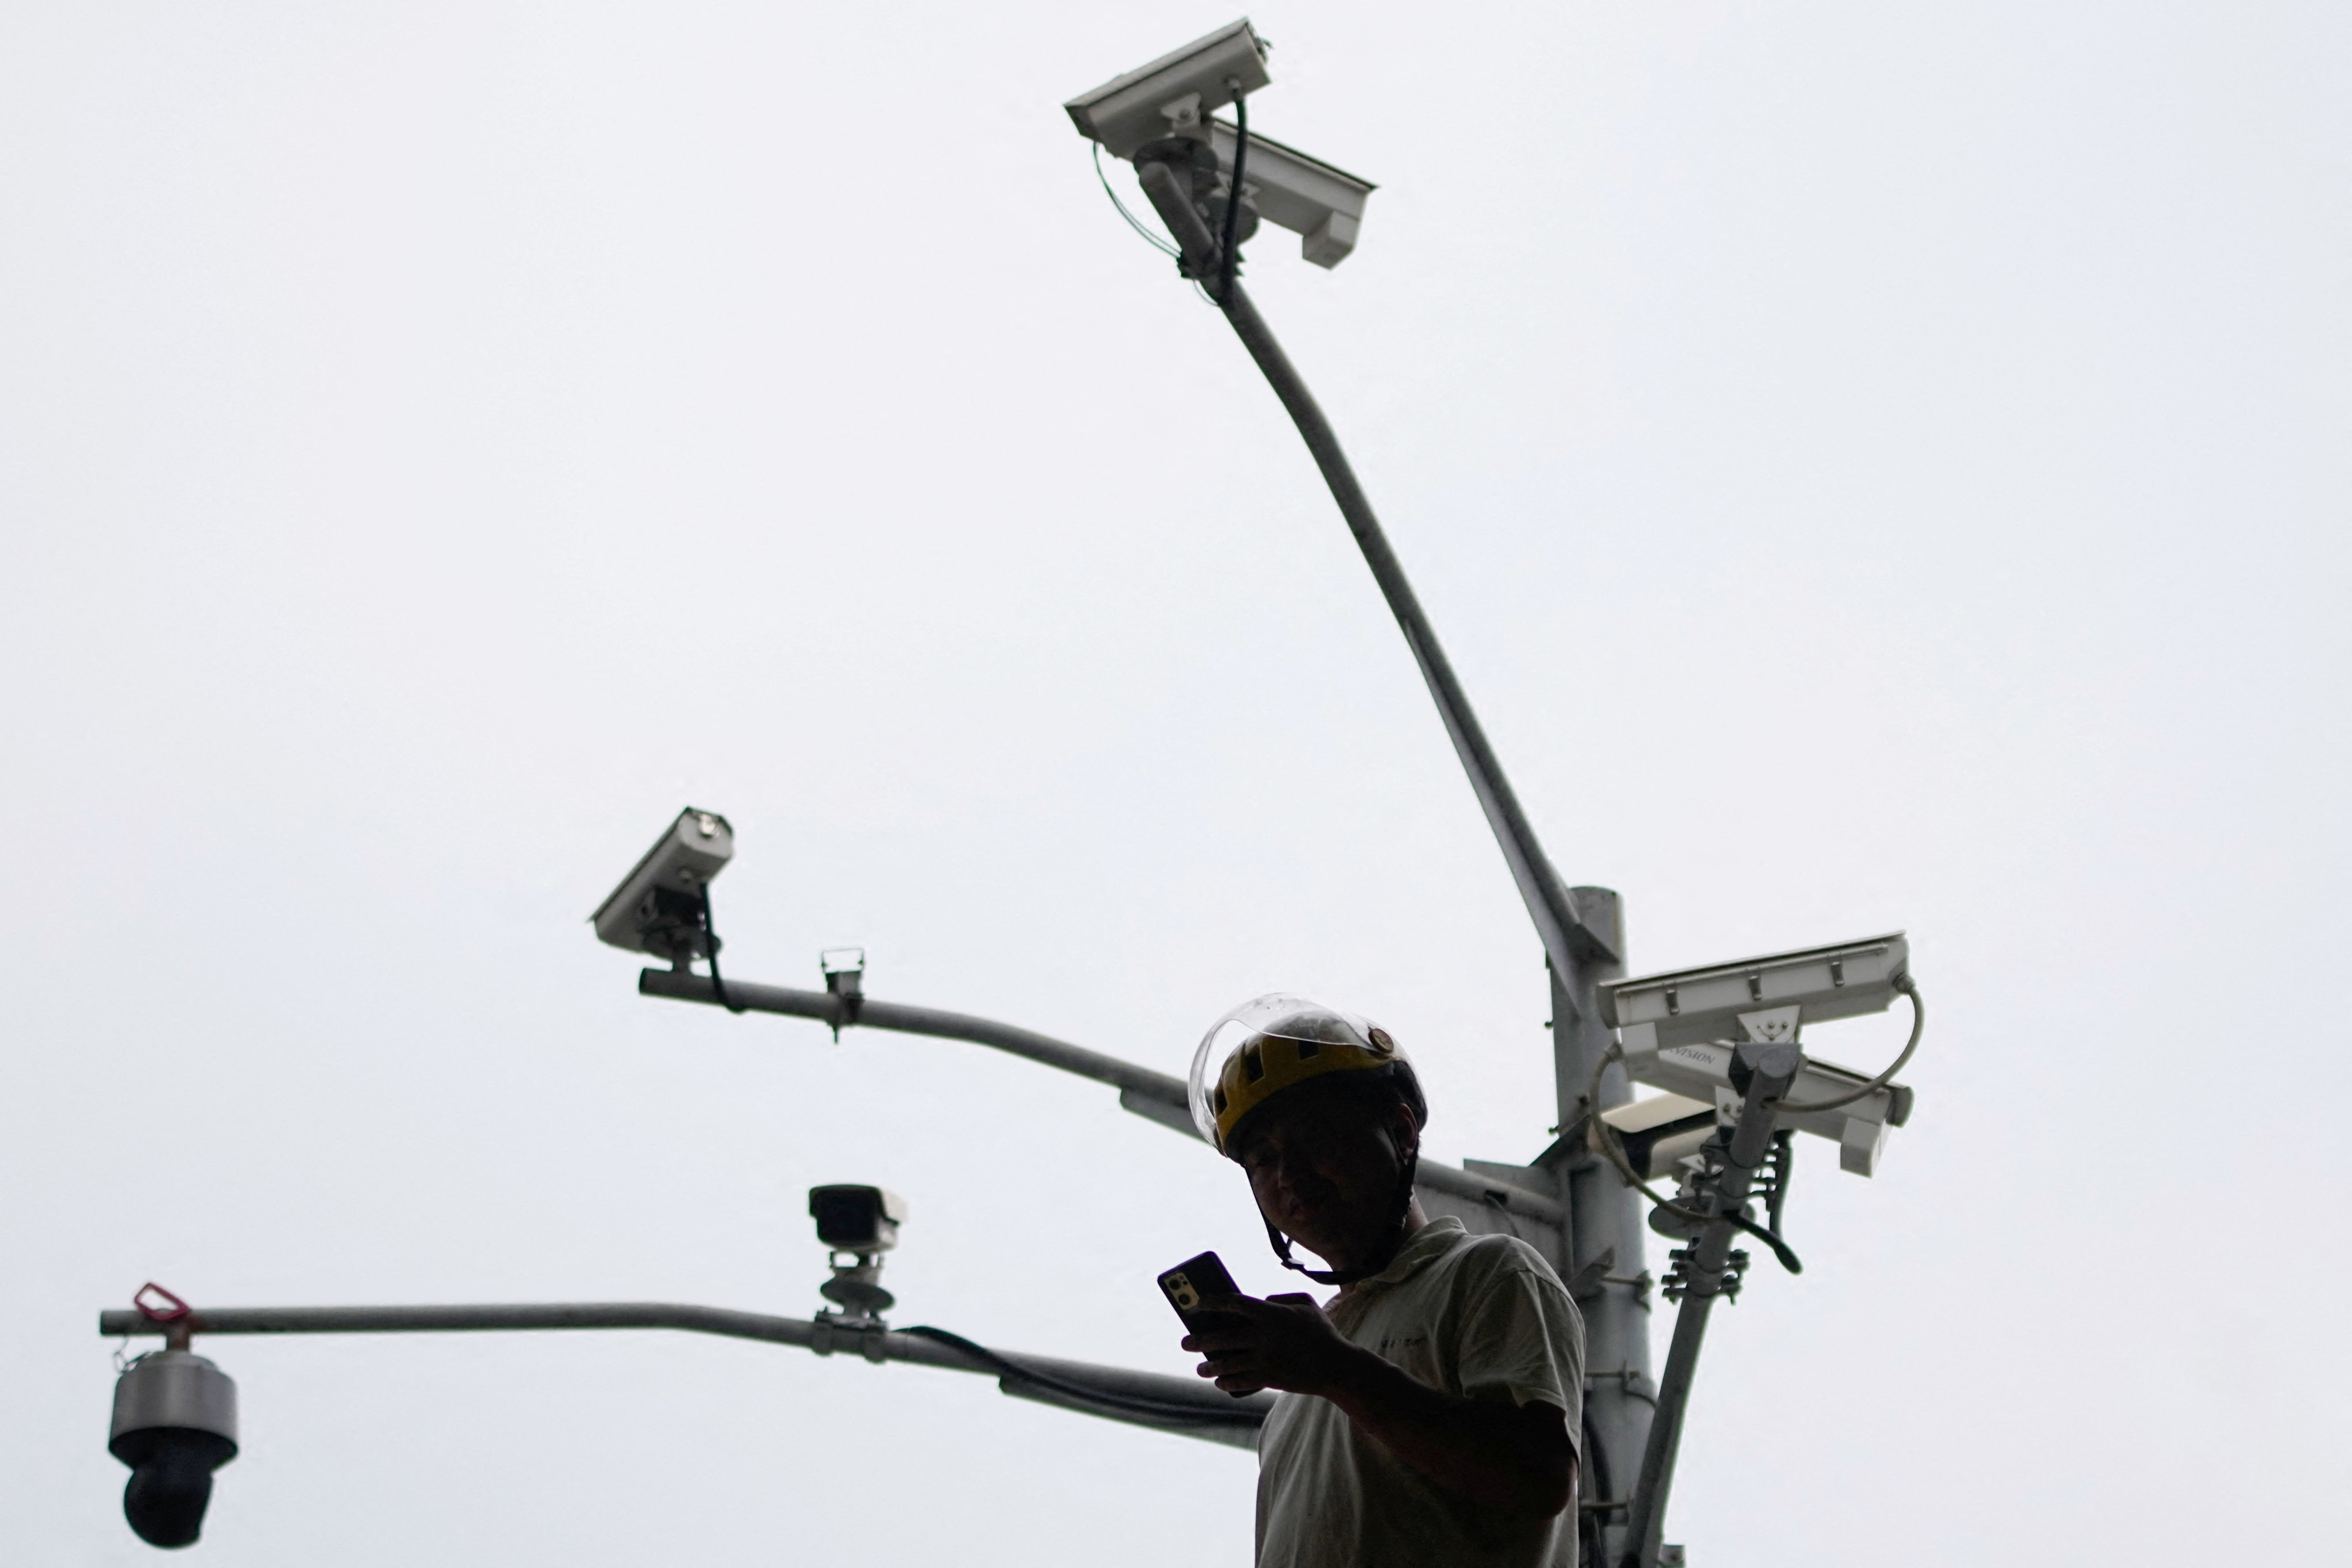 A man looks at a phone under surveillance cameras on a street, in Shanghai